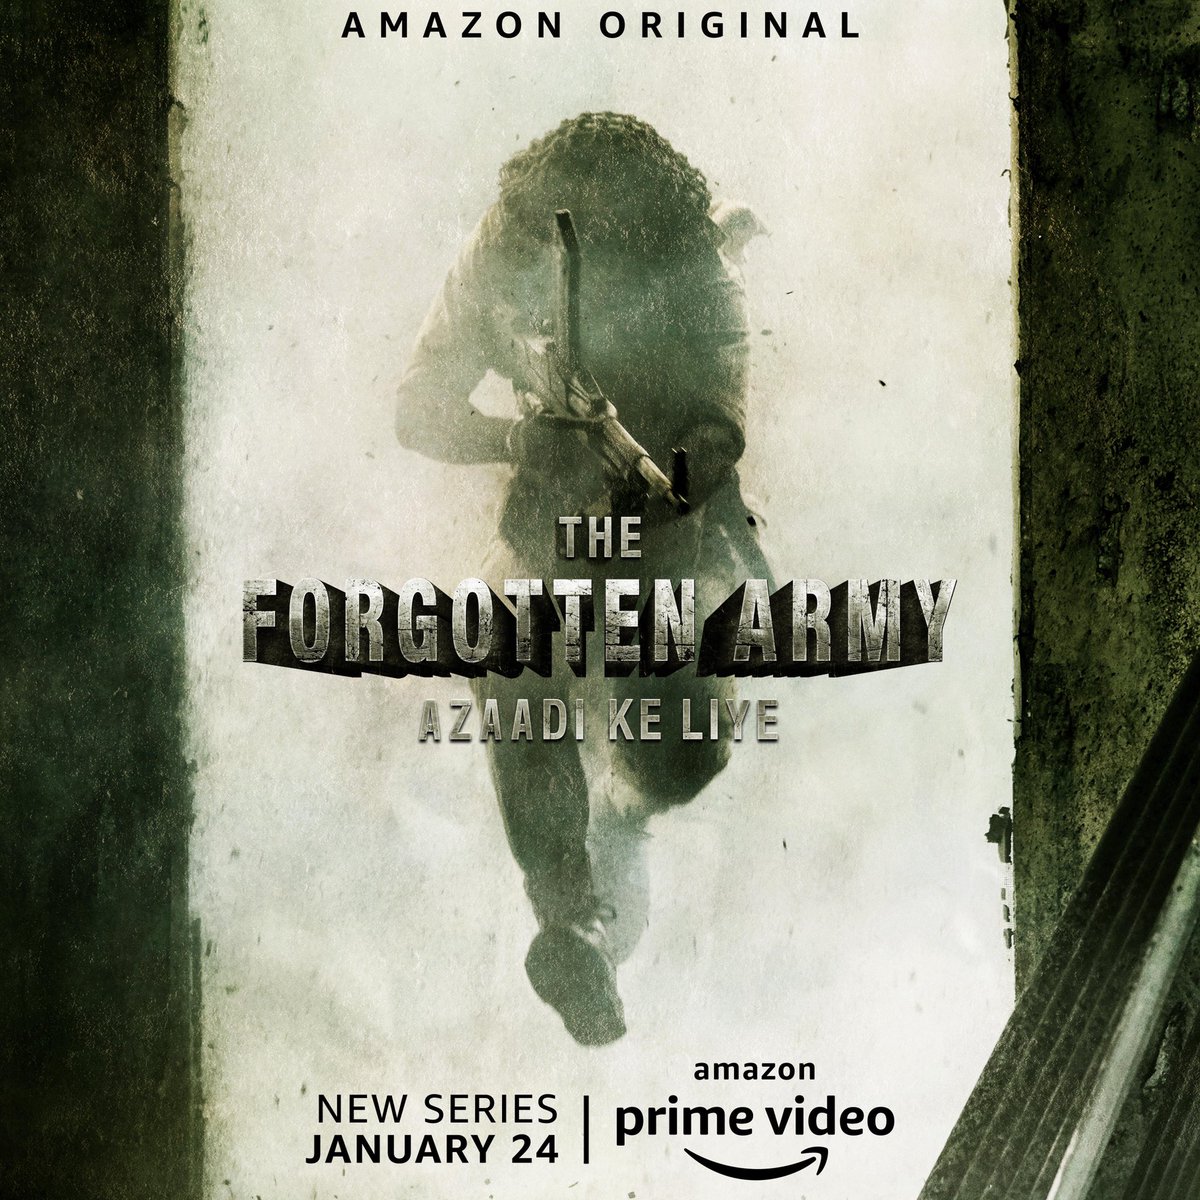 You might know the story but you don’t know about the sacrifices of #TheForgottenArmy. trailer out now: youtu.be/NG6PUj-TUfY @PrimeVideoIN @kabirkhankk #Sharvari